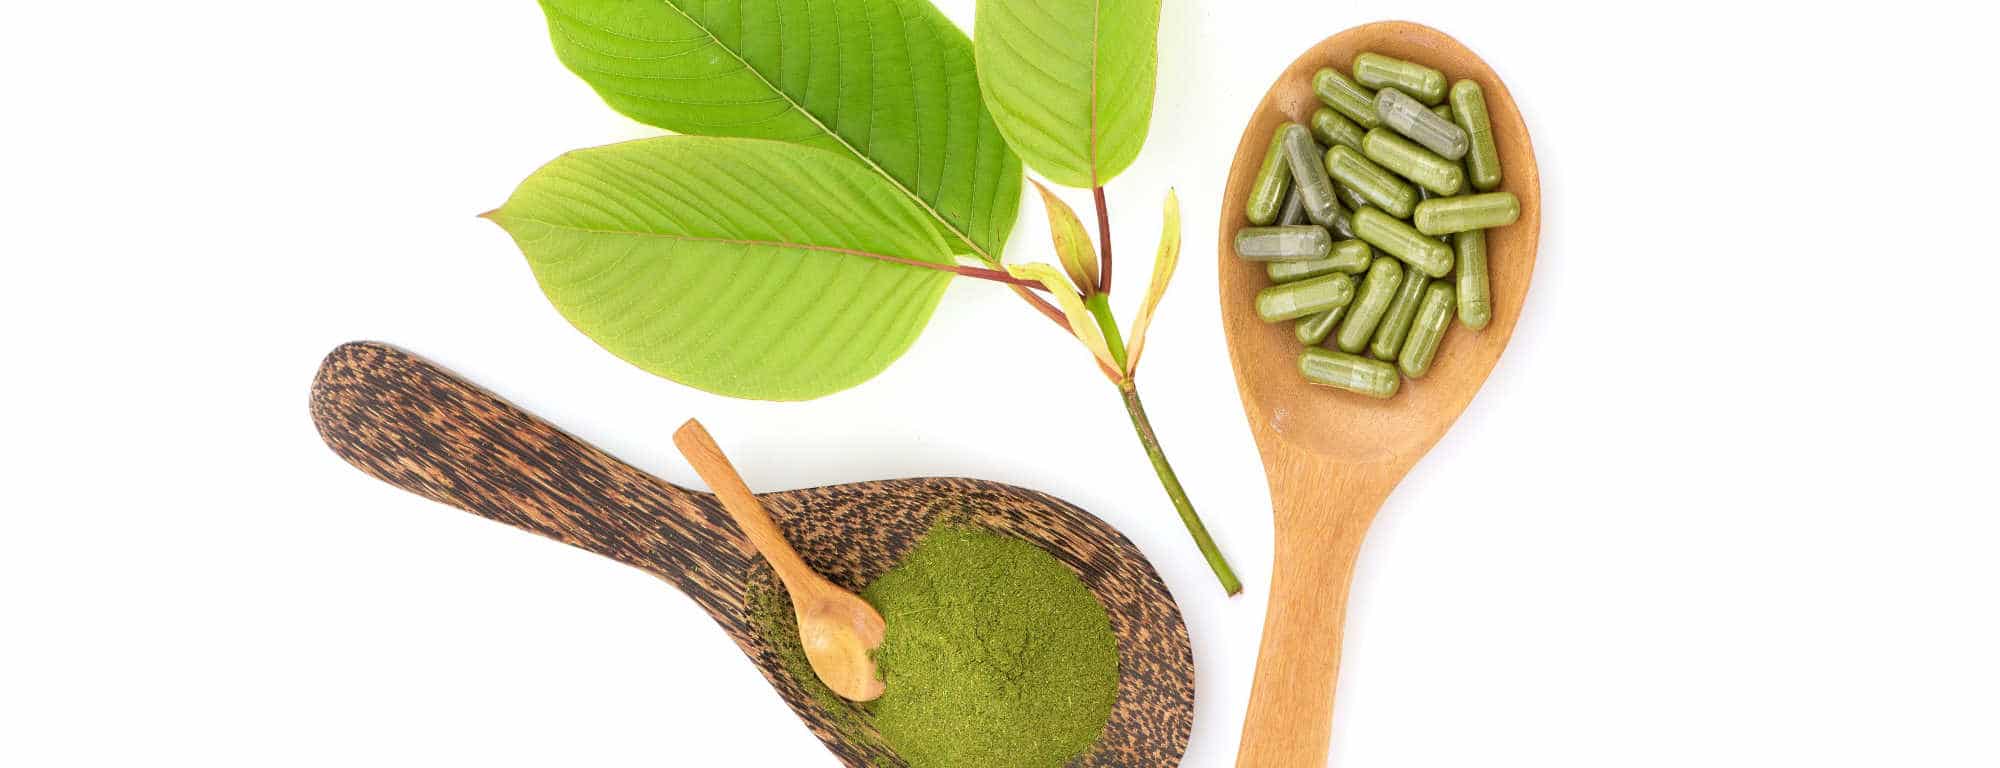 products-of-monarch-kratom